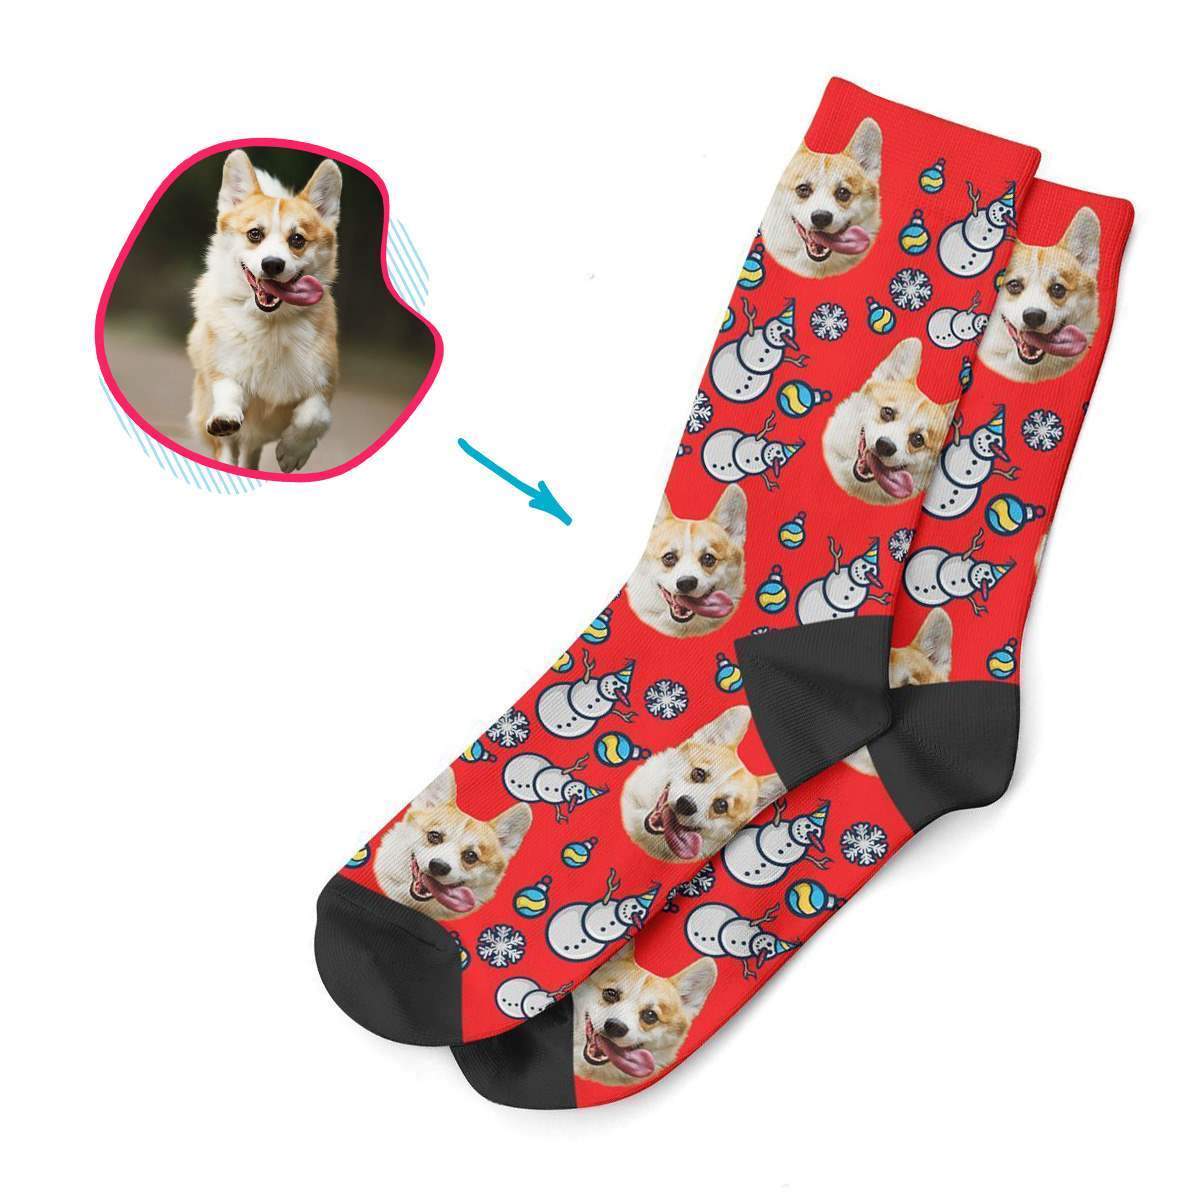 red Snowman socks personalized with photo of face printed on them